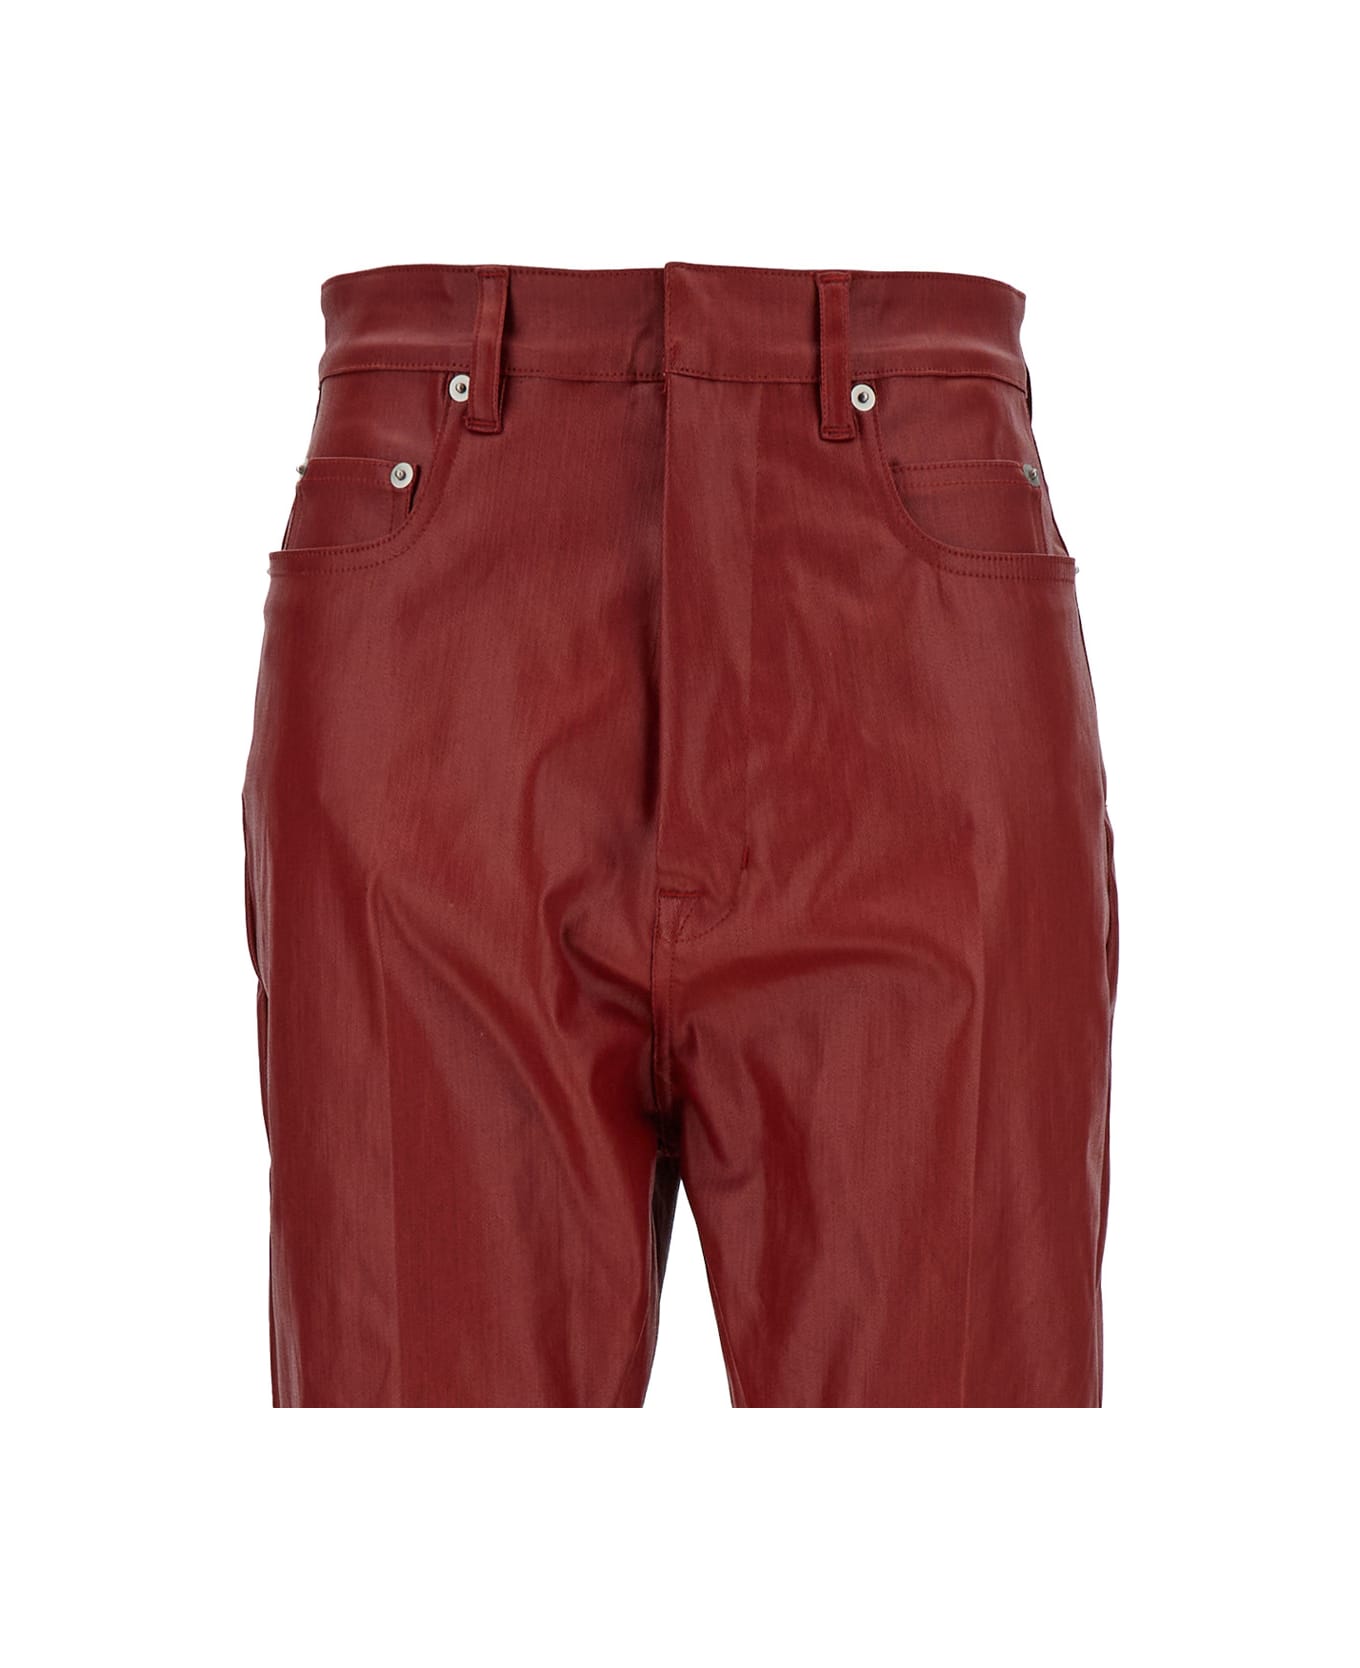 Rick Owens Red Flared High Waist Pants In Cotton Blend Woman - Red